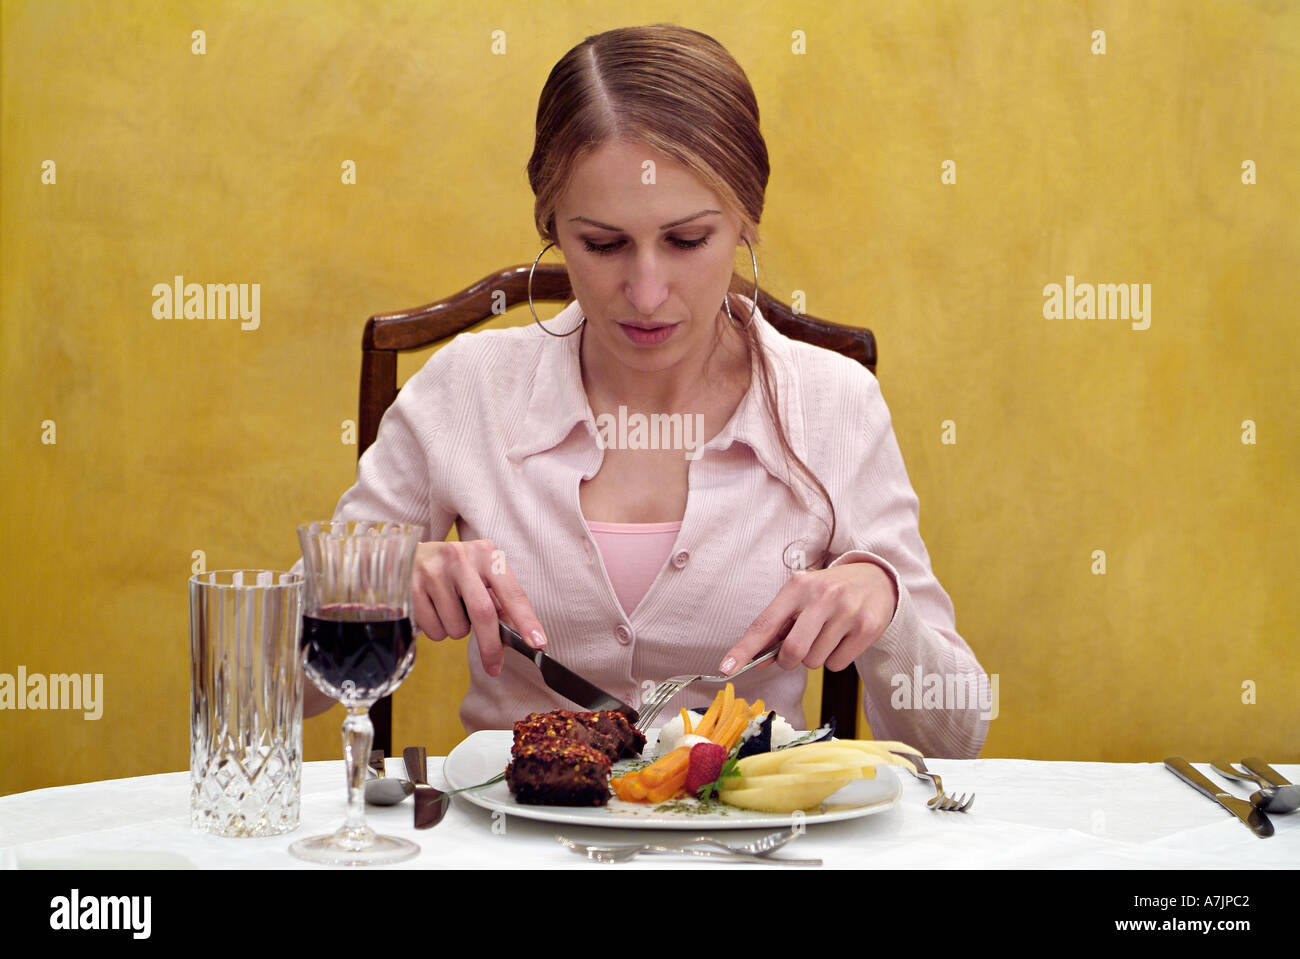 Woman Dining on Beefsteak at a Restaurant Table Stock Photo